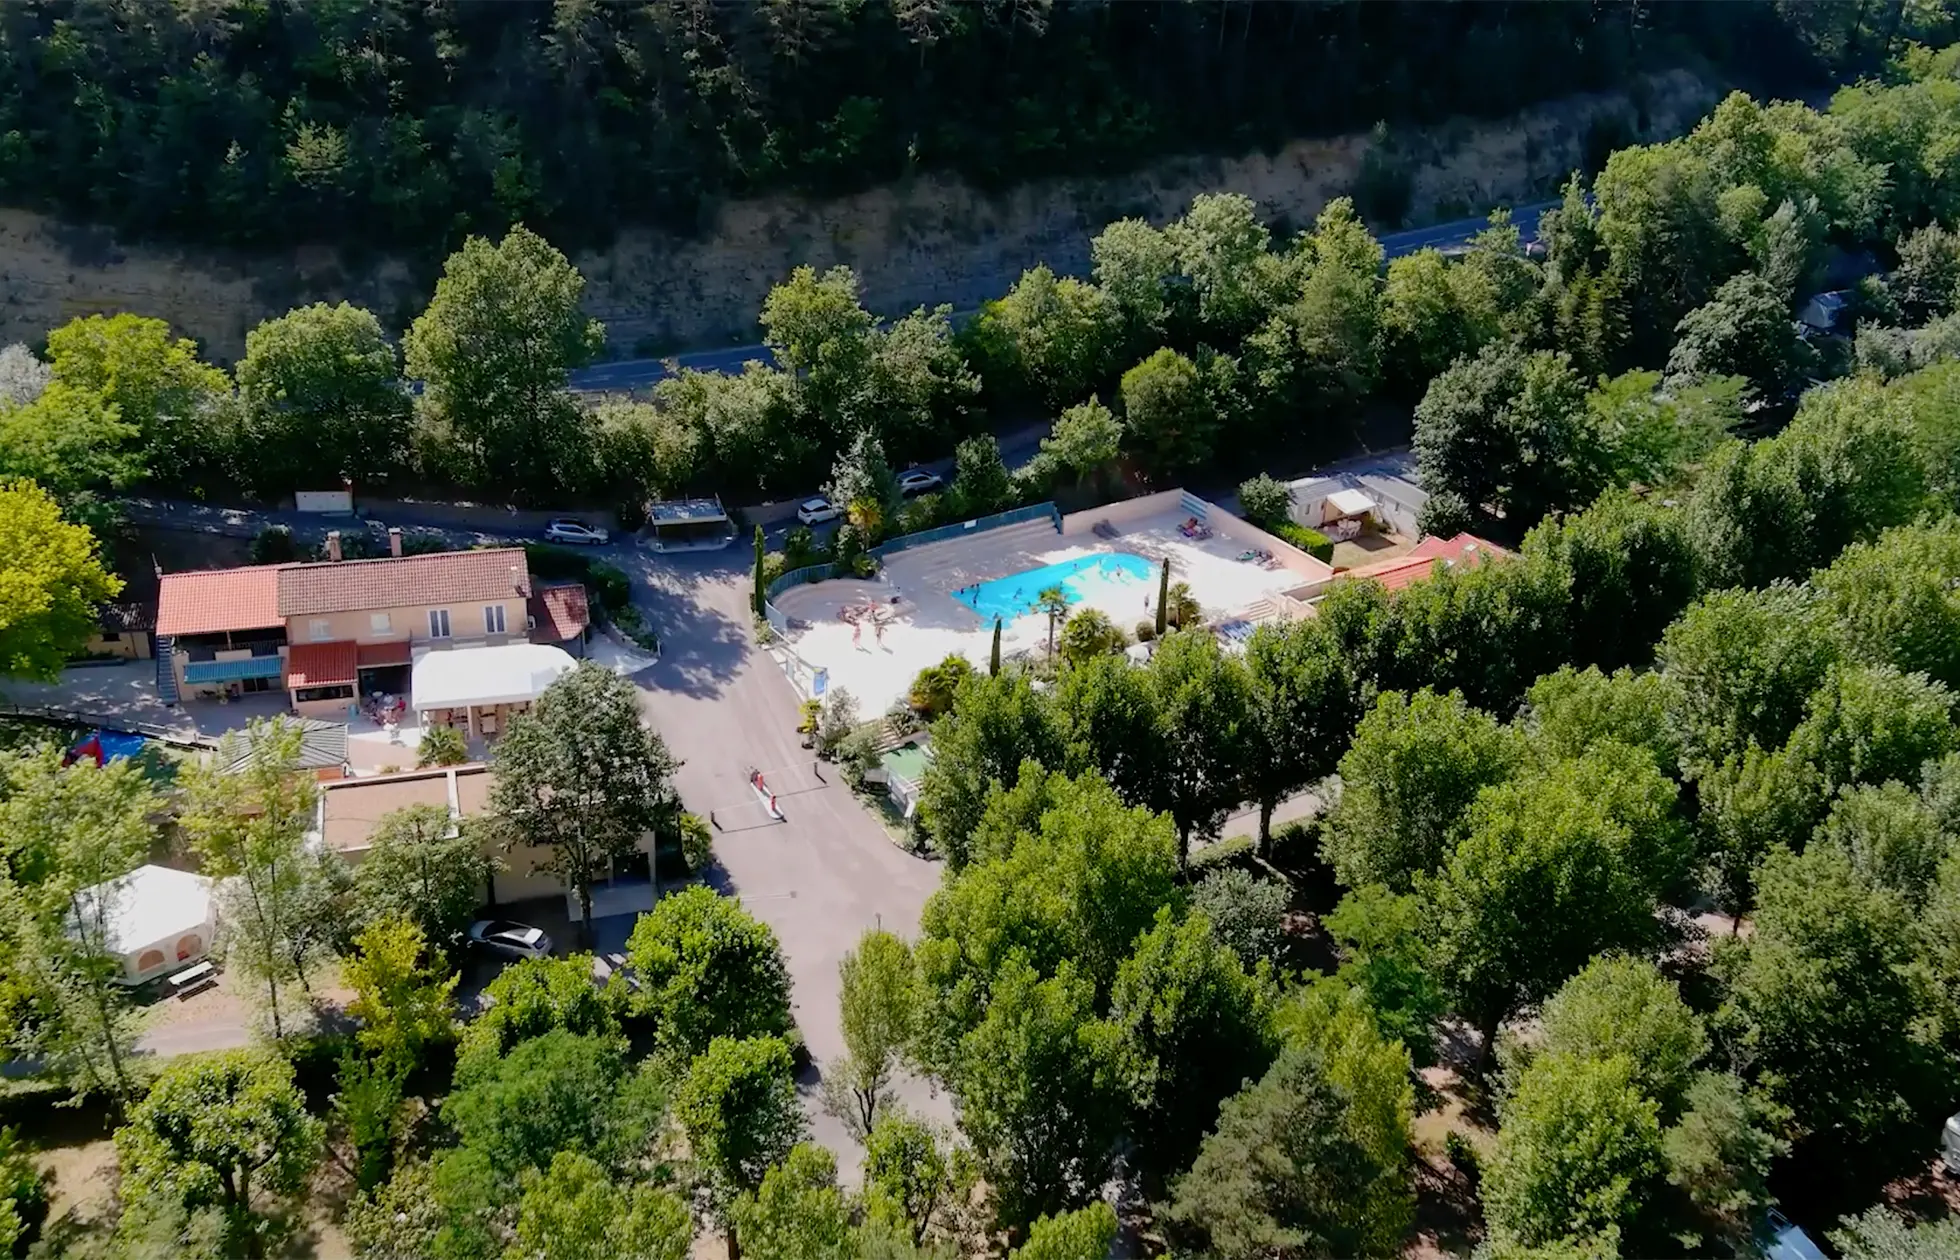 offer ' - '03 - Camping Le Peyrelade - Situation